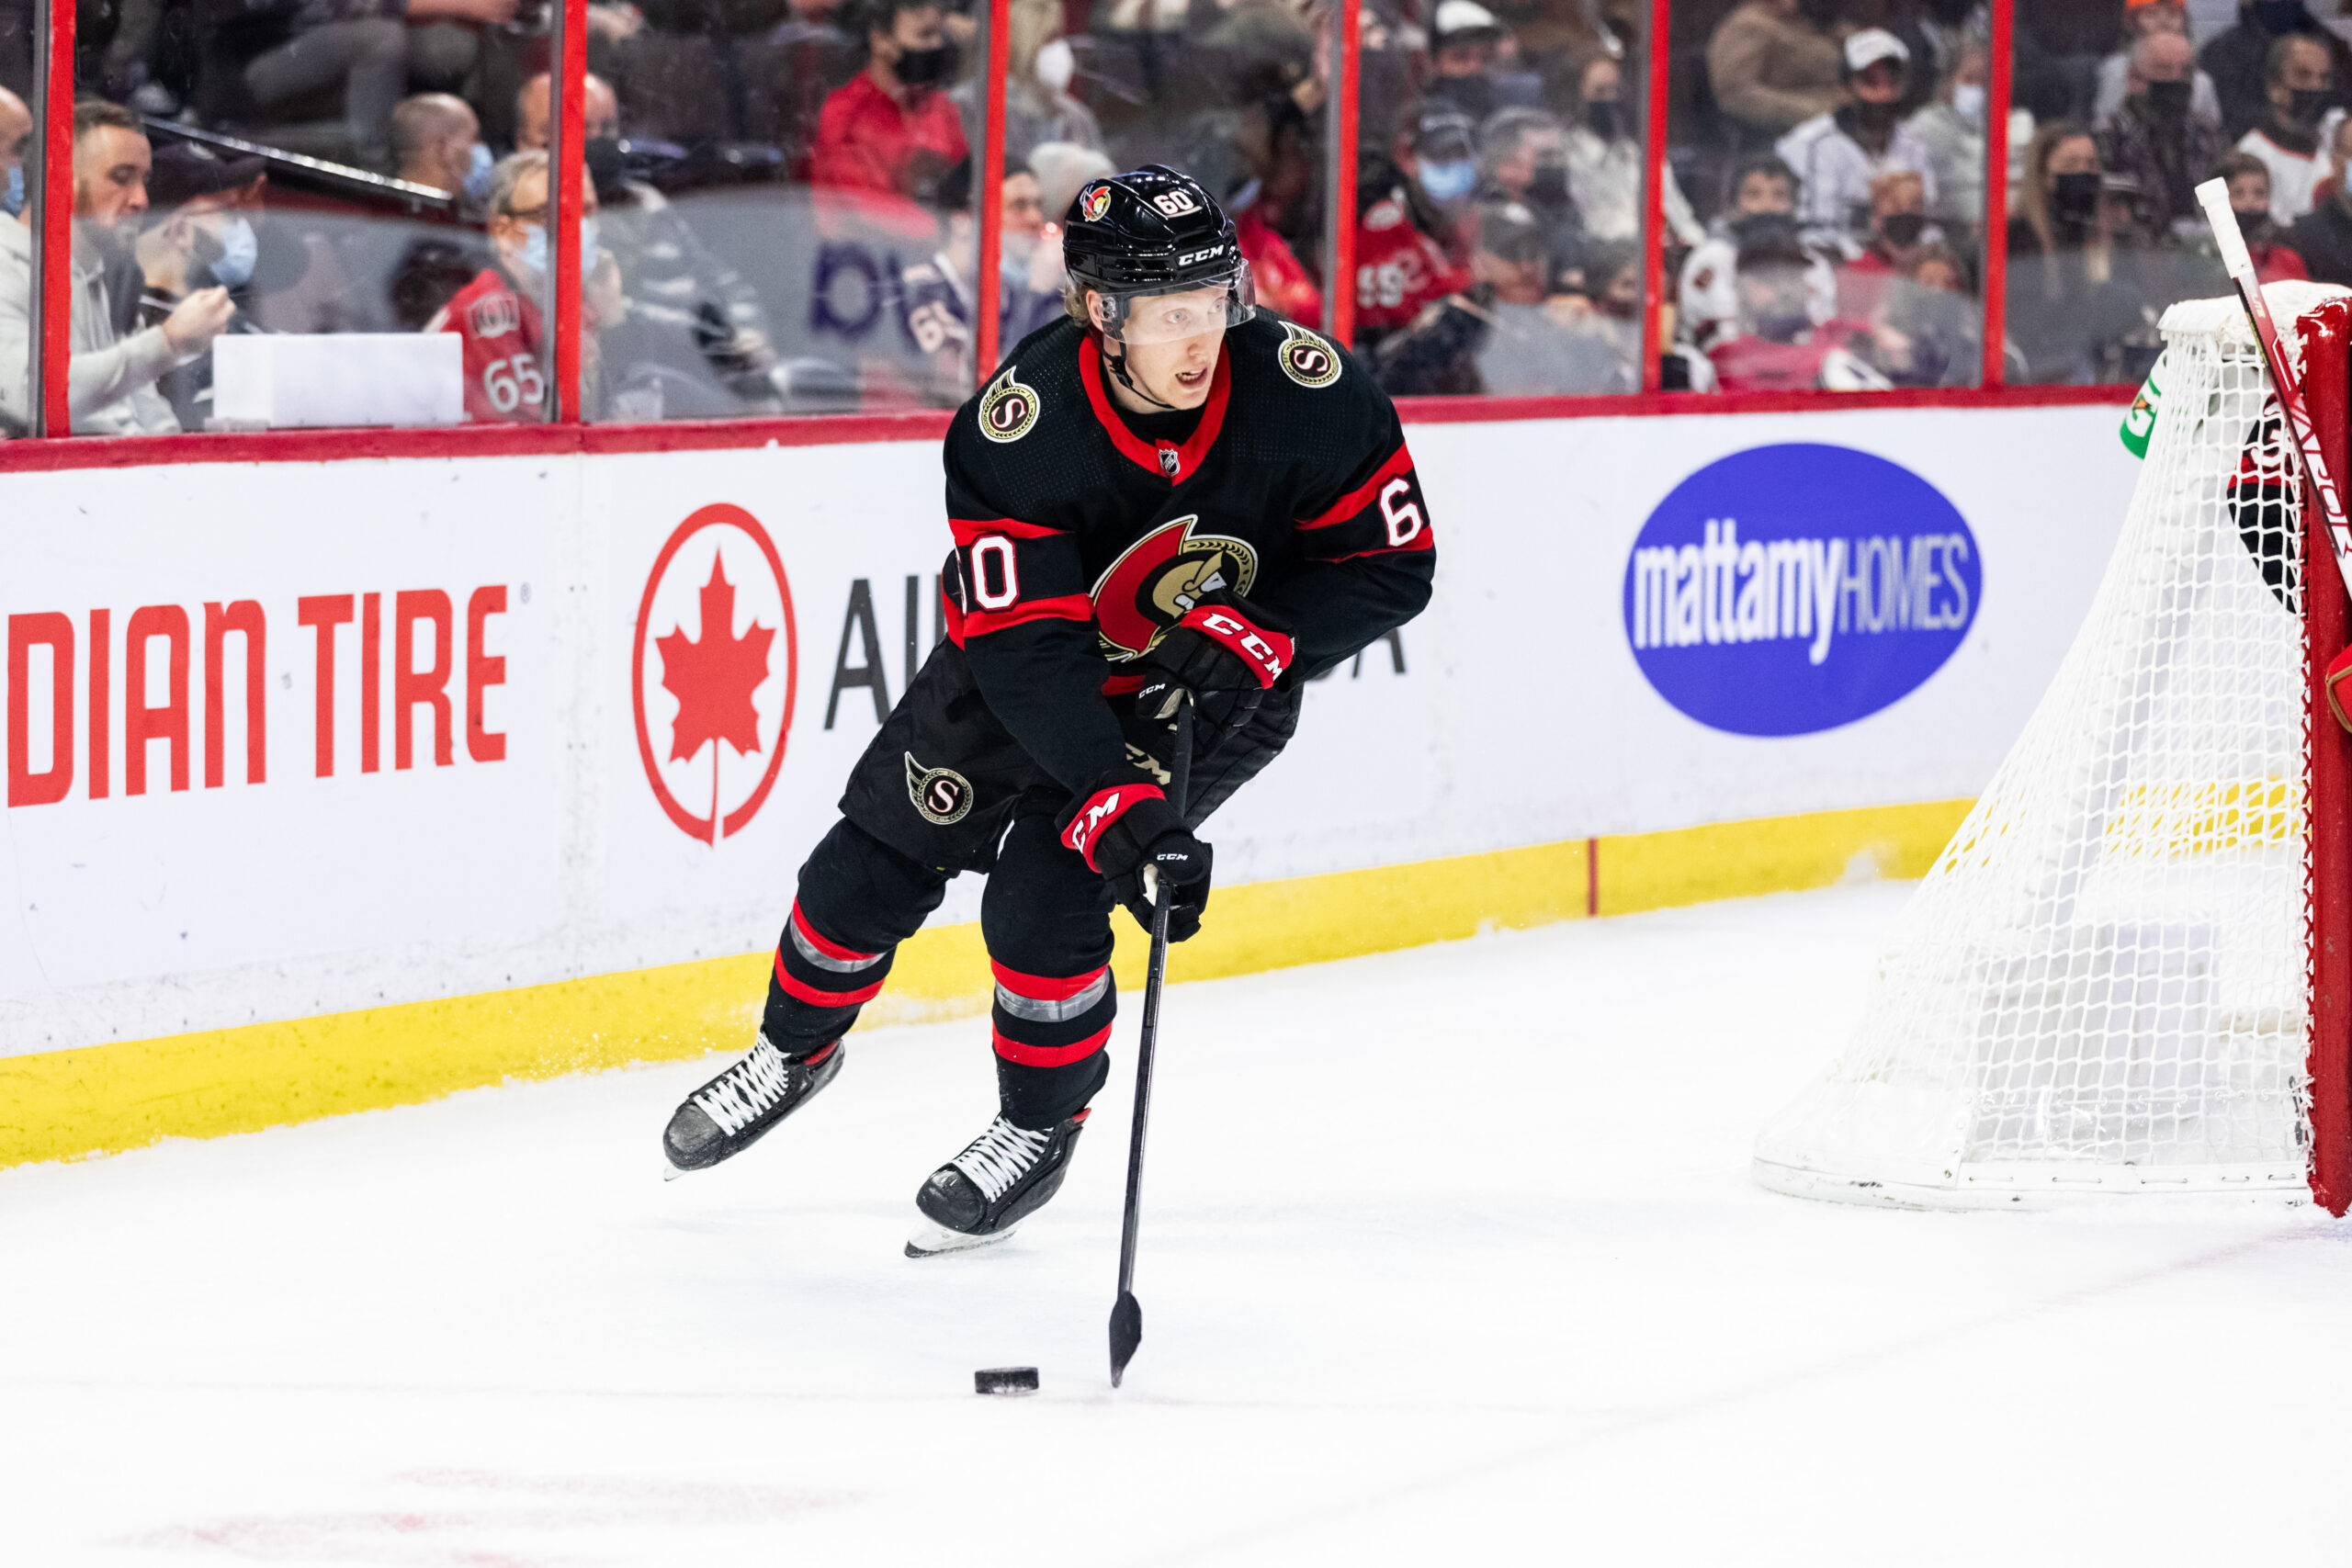 Senators’ Thomson Hits Waivers in Second Round of Roster Cuts